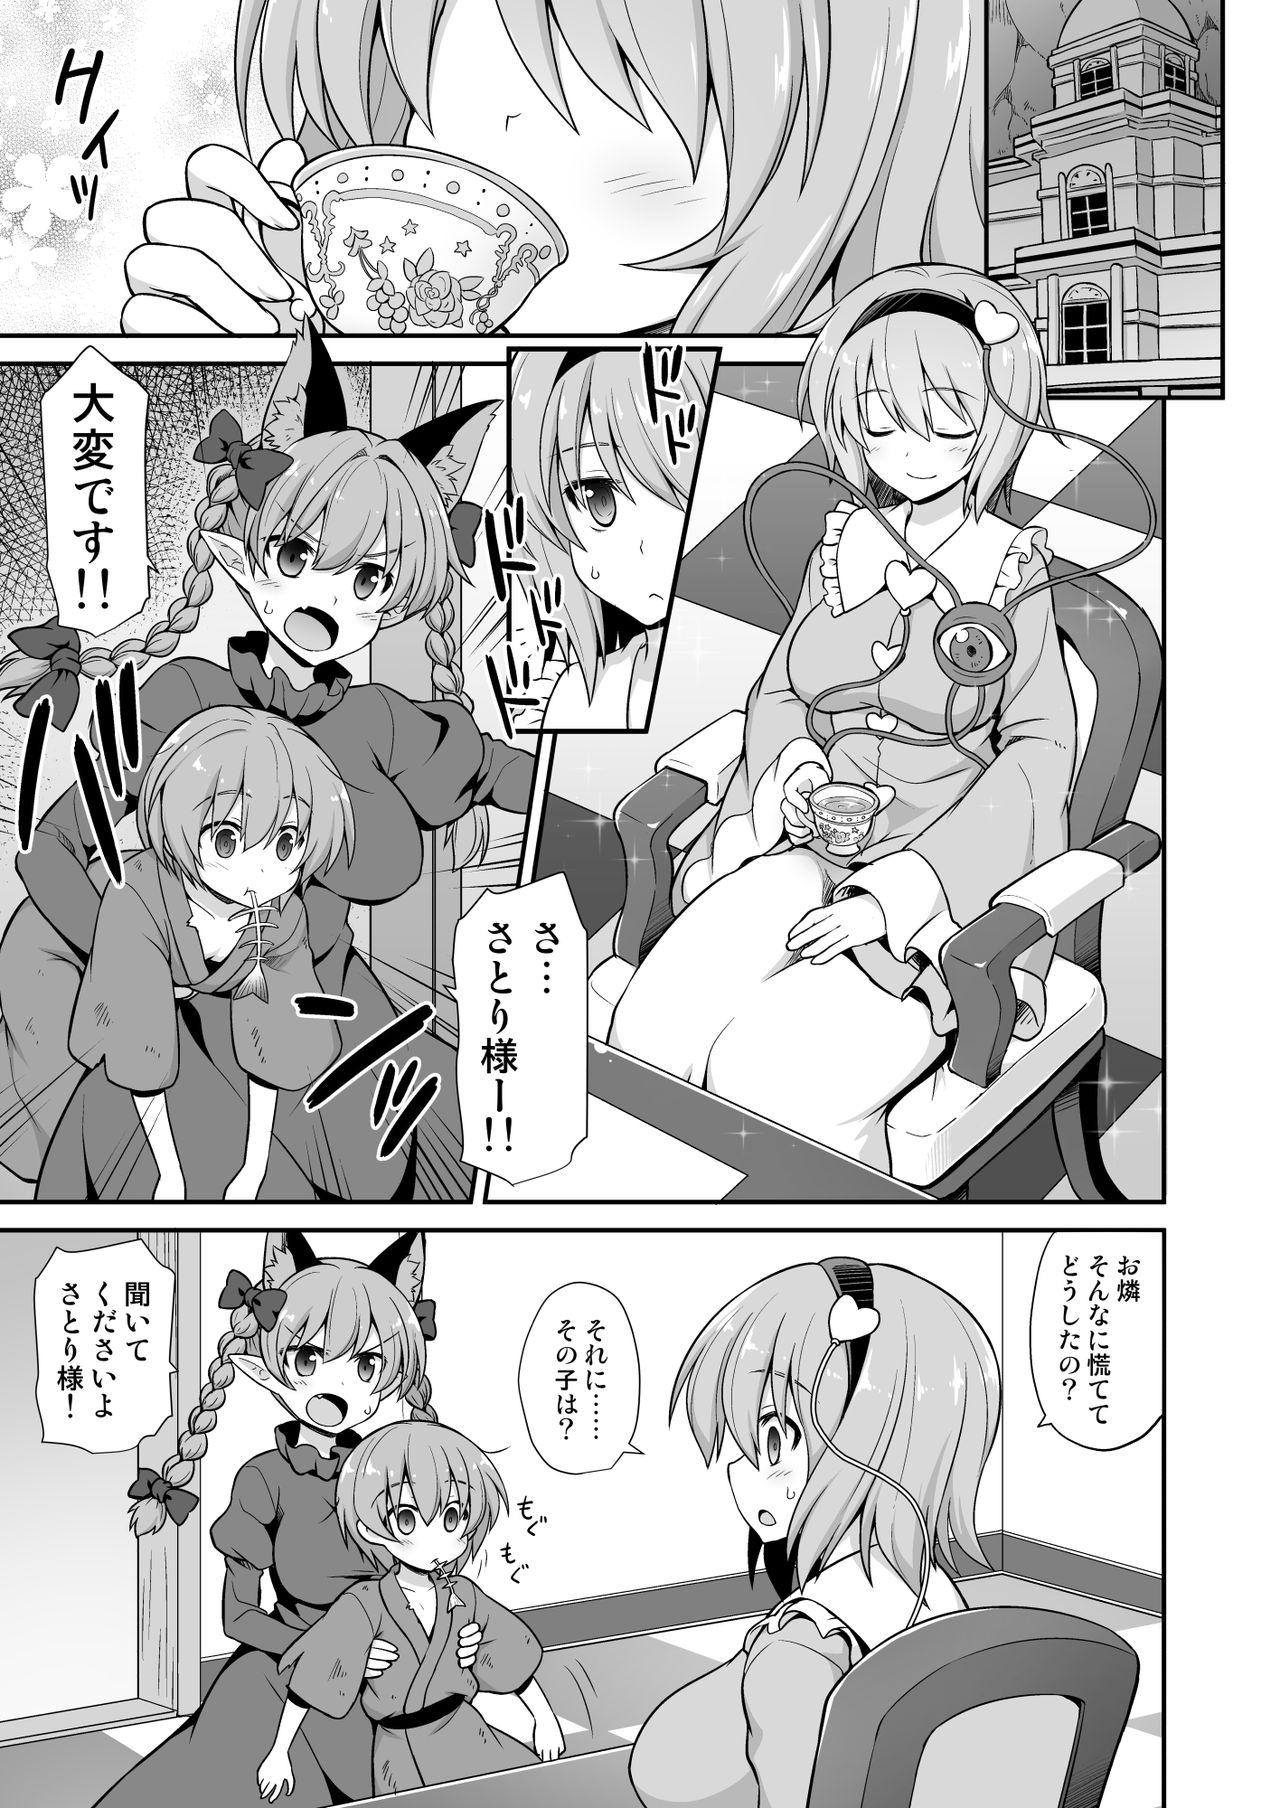 Gays Satori Onee-chan to Icha Love Amaex!! - Touhou project Porn Star - Page 3